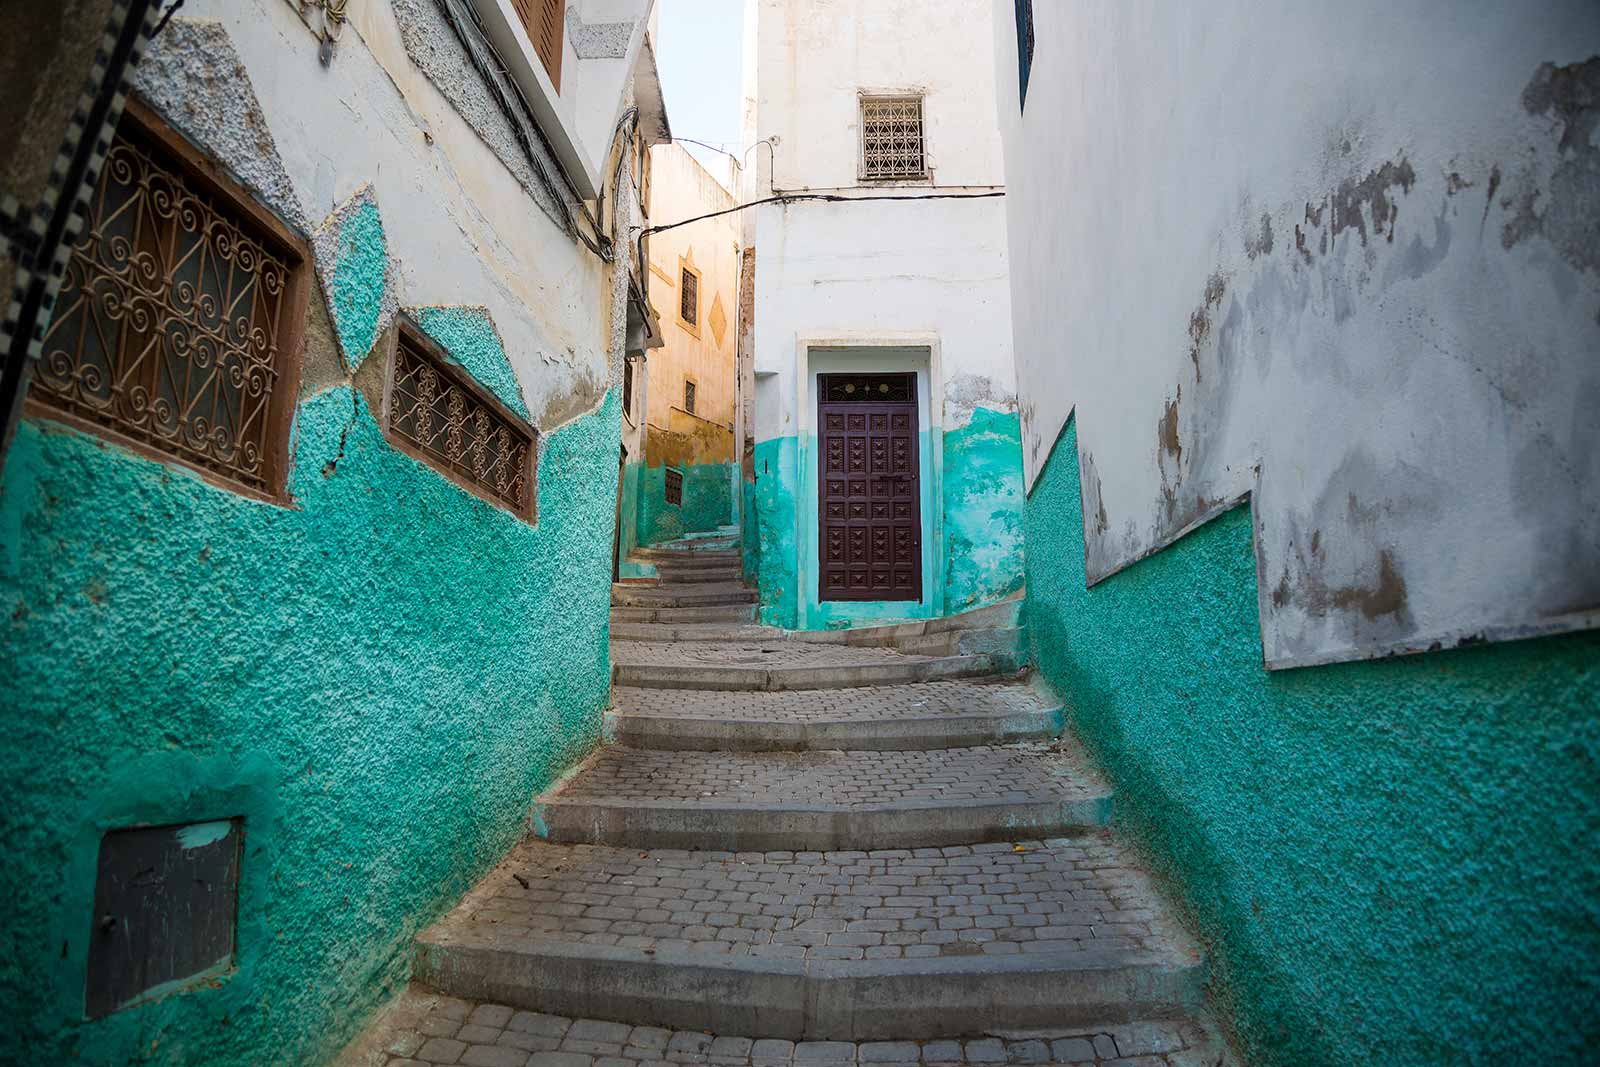 The colourful streets of Moulay Idriss seem like another Chefchaouen, but instead of blue, cyan is the main colour in use here.